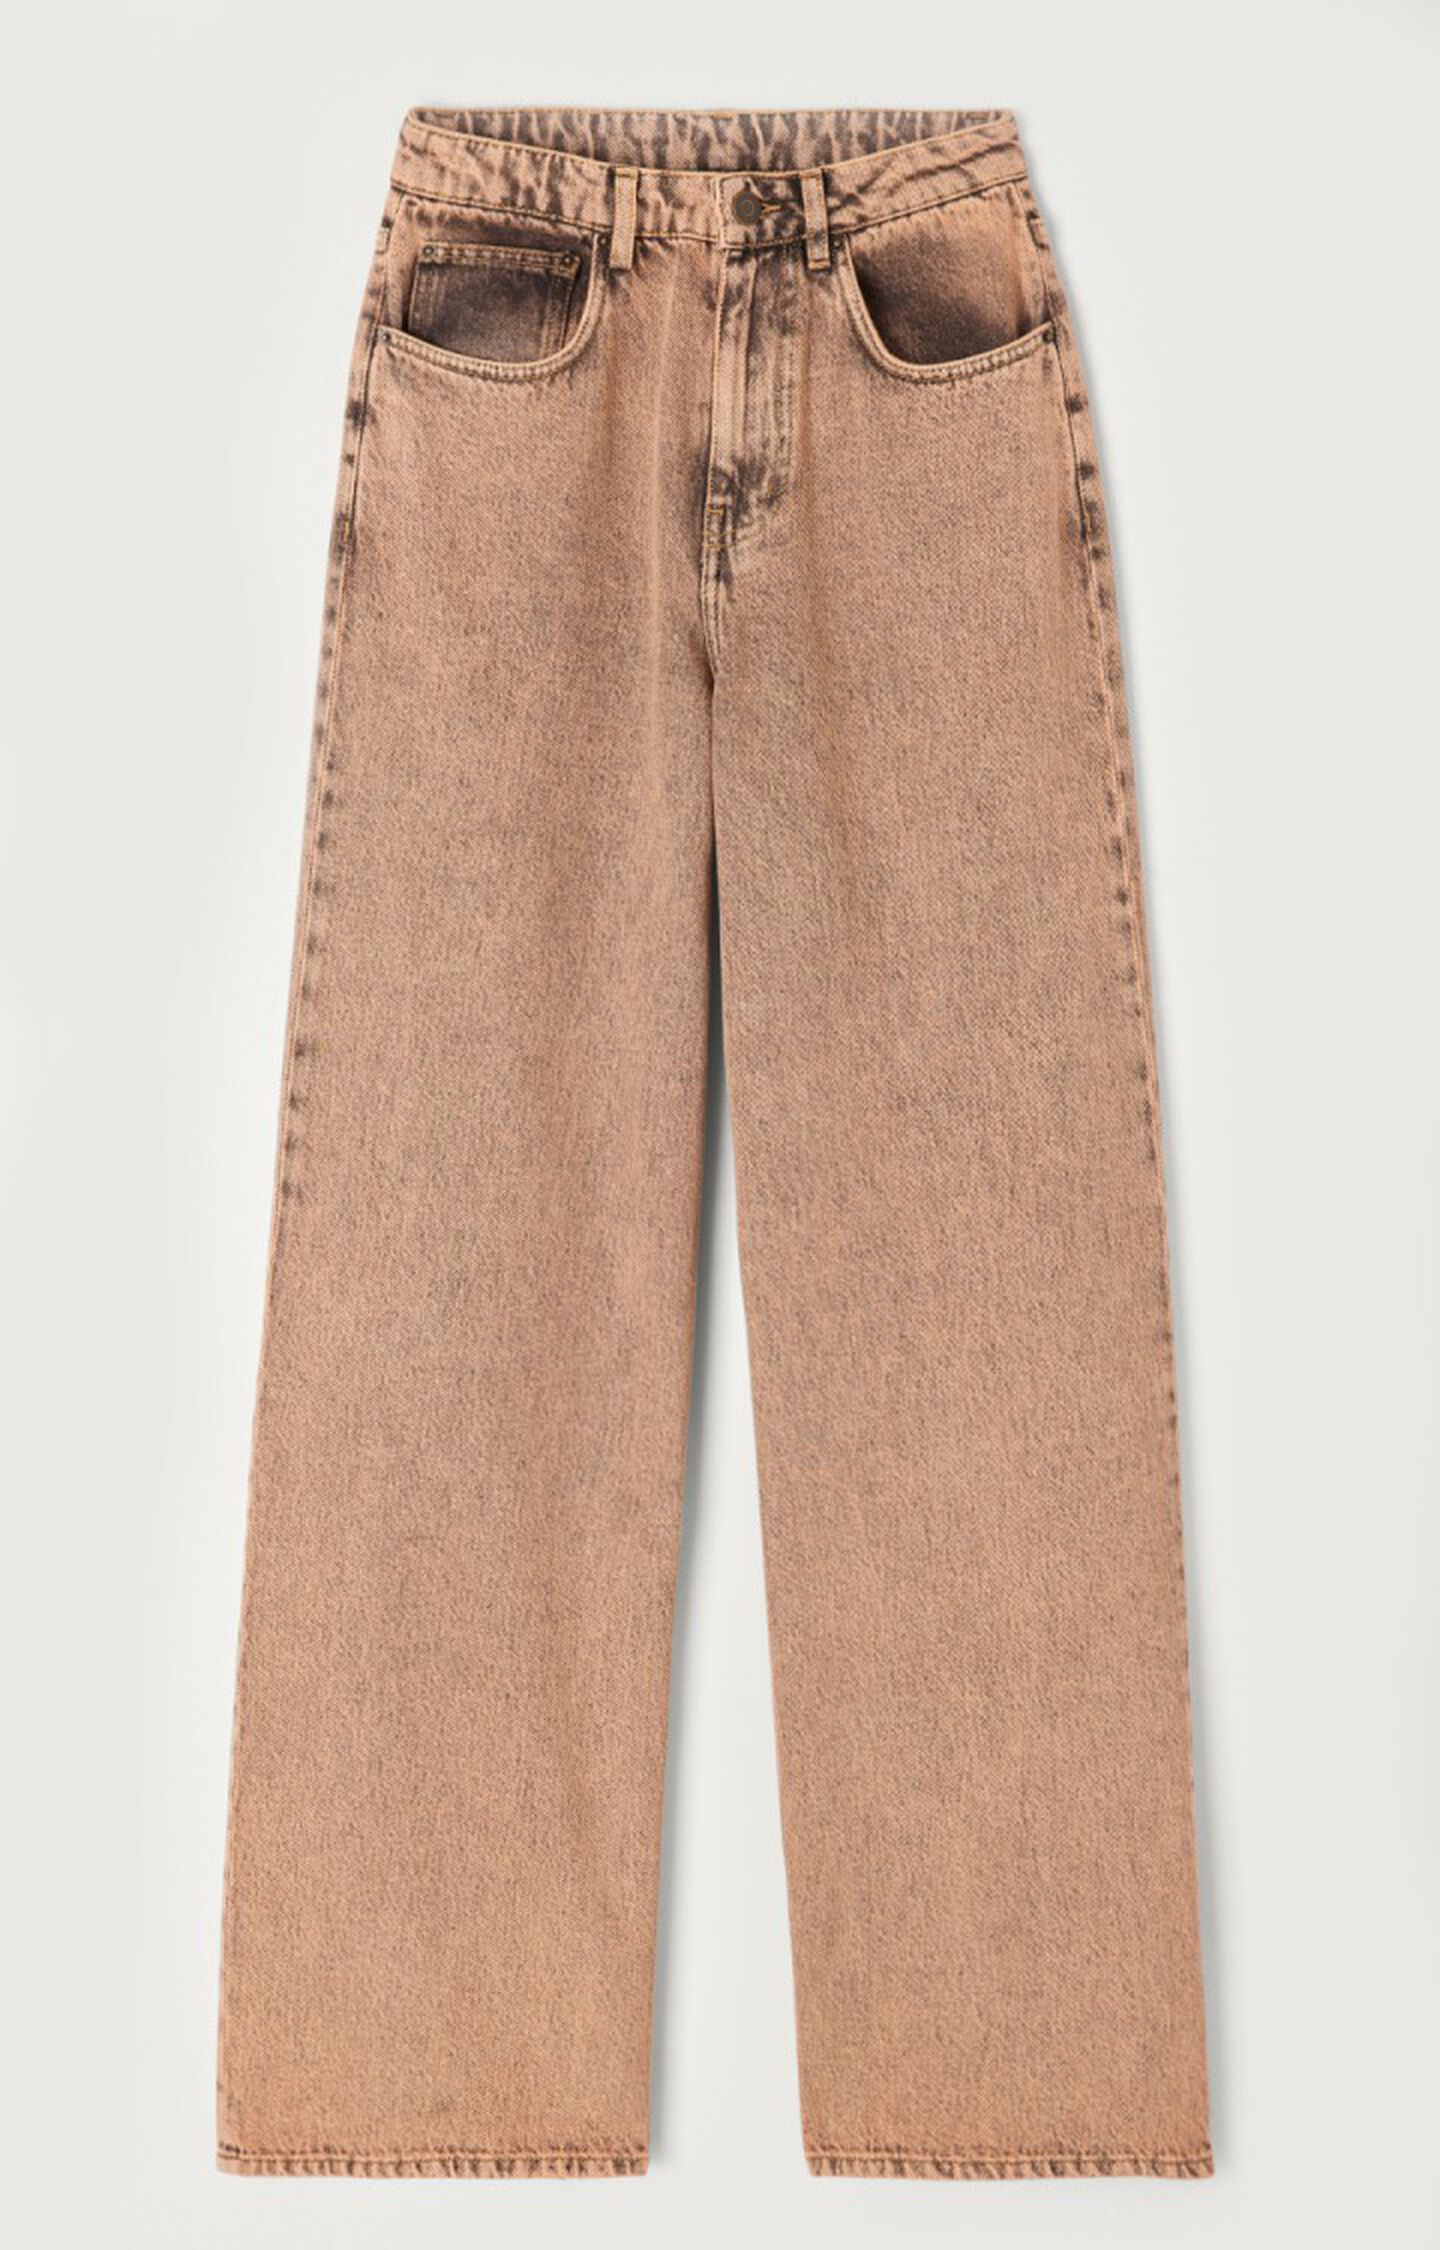 Recycled + Vintage Clothing - Vintage Corduroy - Women's Corduroy Pants -  Page 1 